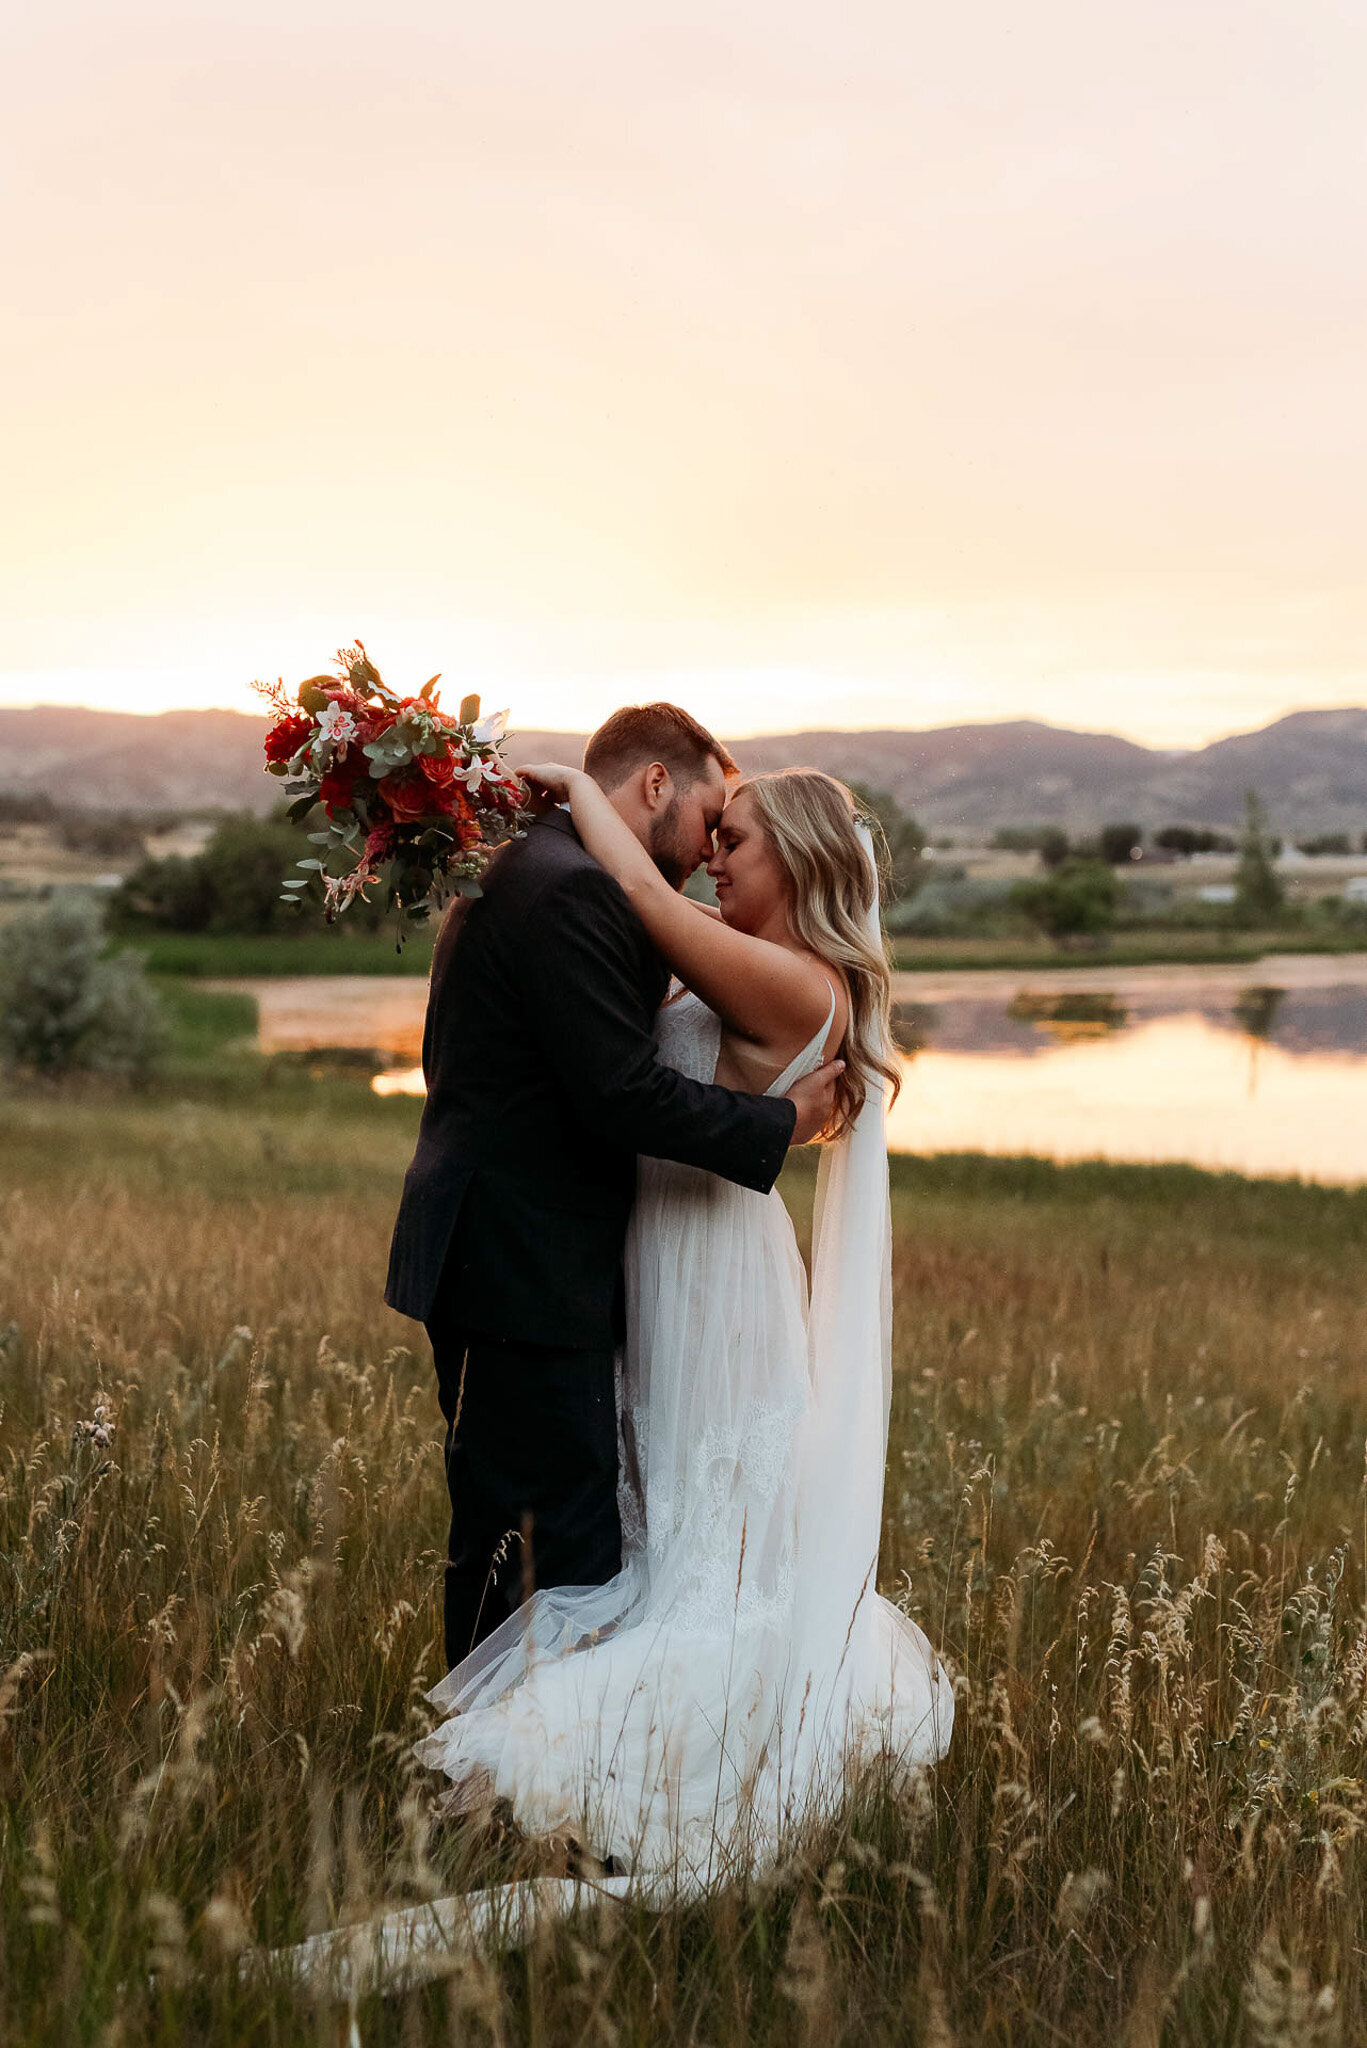 serious photo of bride and groom alone together in a field on the waters edge